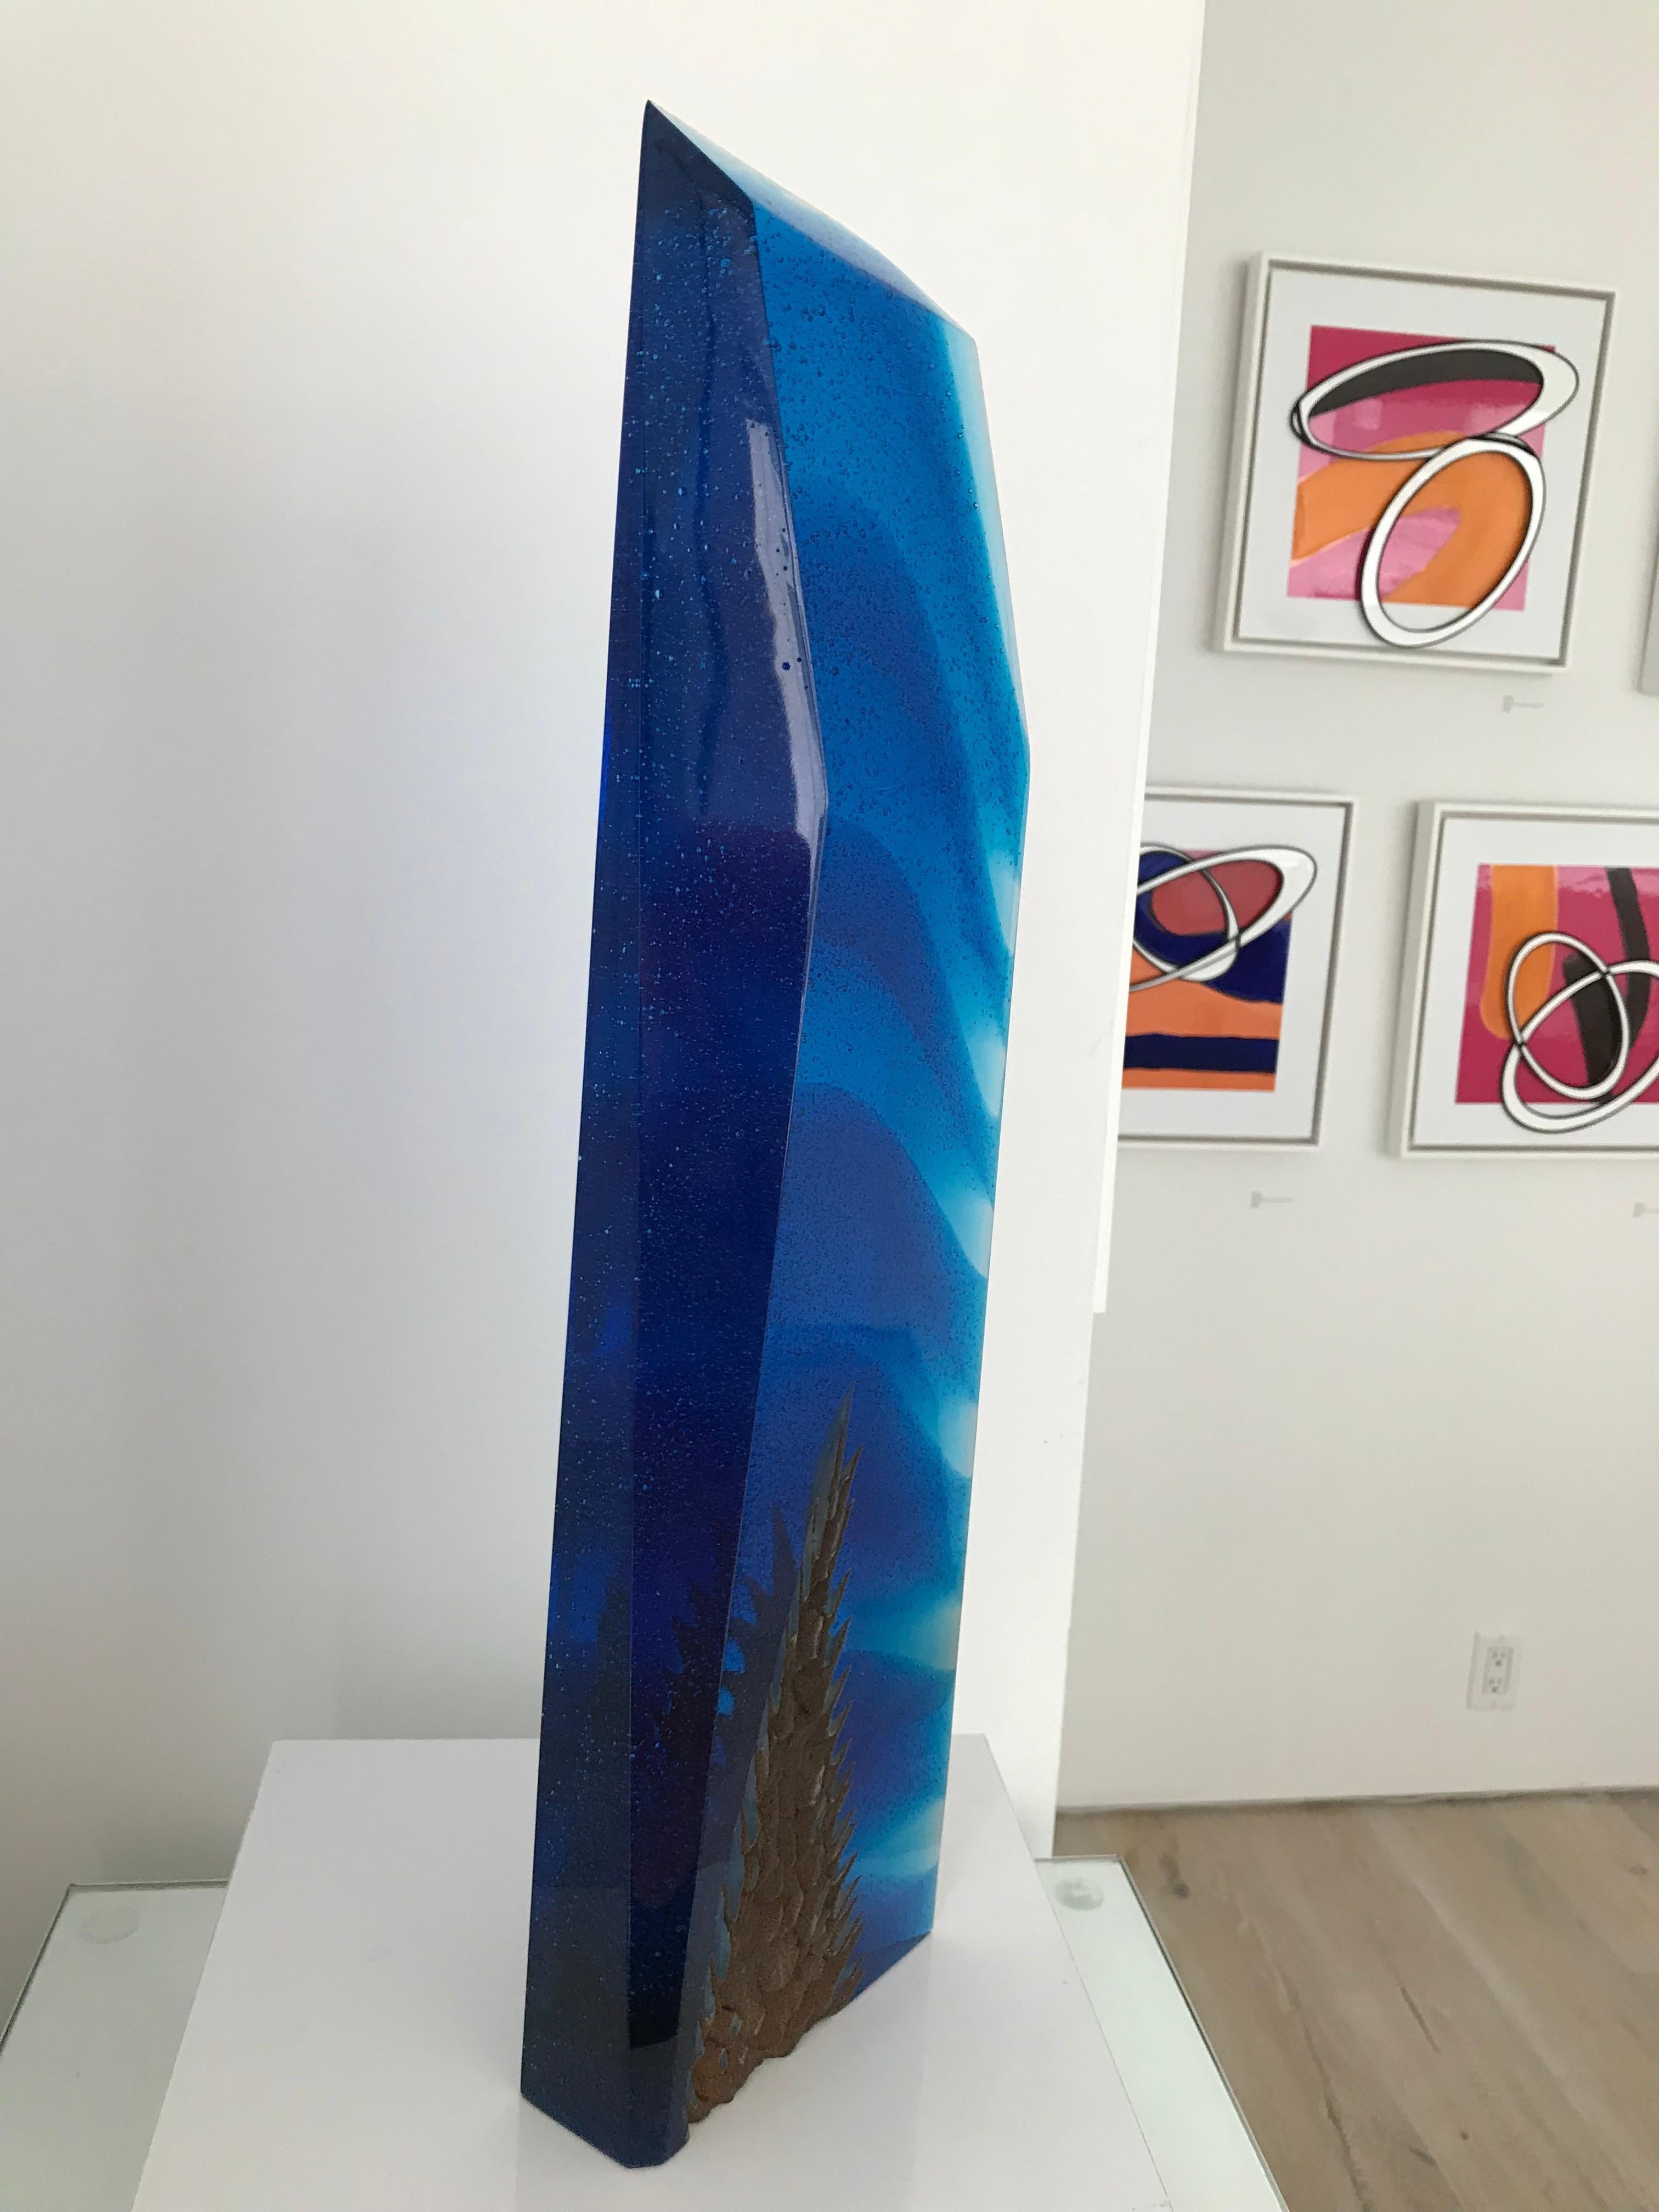    Bernstein skillfully combines metaphor with the power and sensuality of sculpted glass. His cast, carved and polished glass sculptures provide the viewer with intimate narrative landscapes, drawn from light, form and color. Alex explores ideas